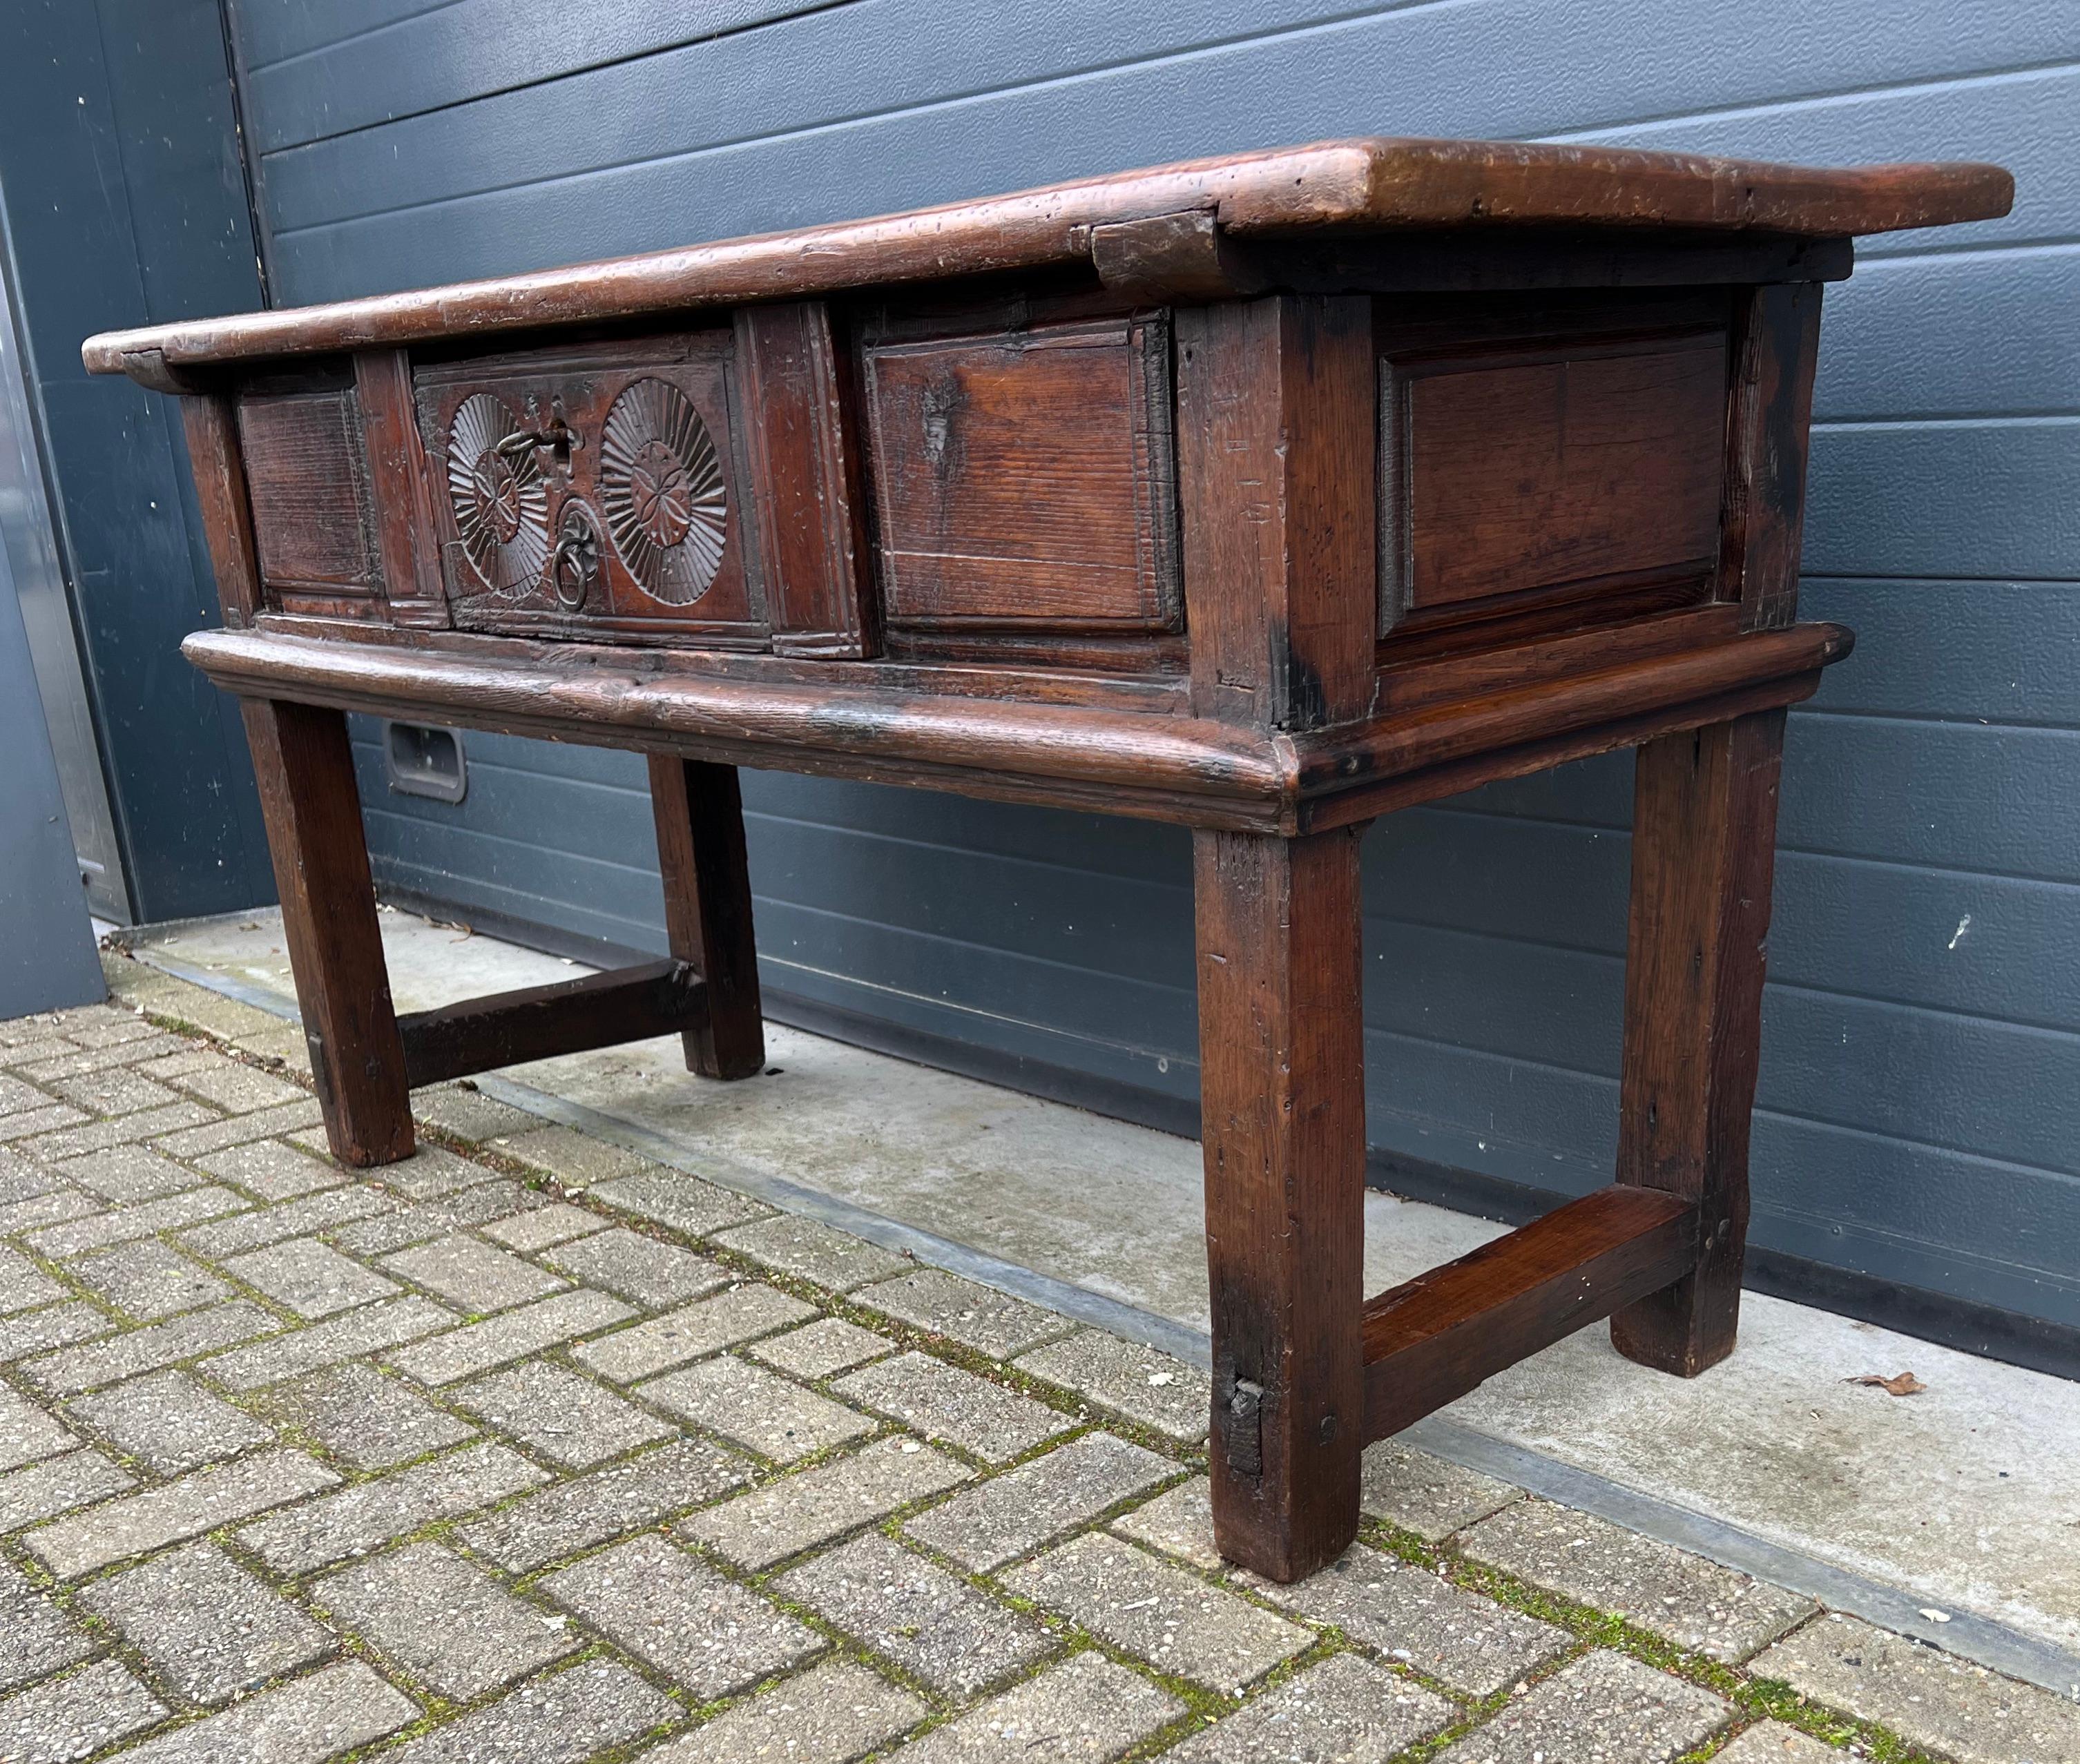 Hand-Carved Antique and Rustic Mid 1700s Carved Chestnut Spanish Countryside Console Table For Sale